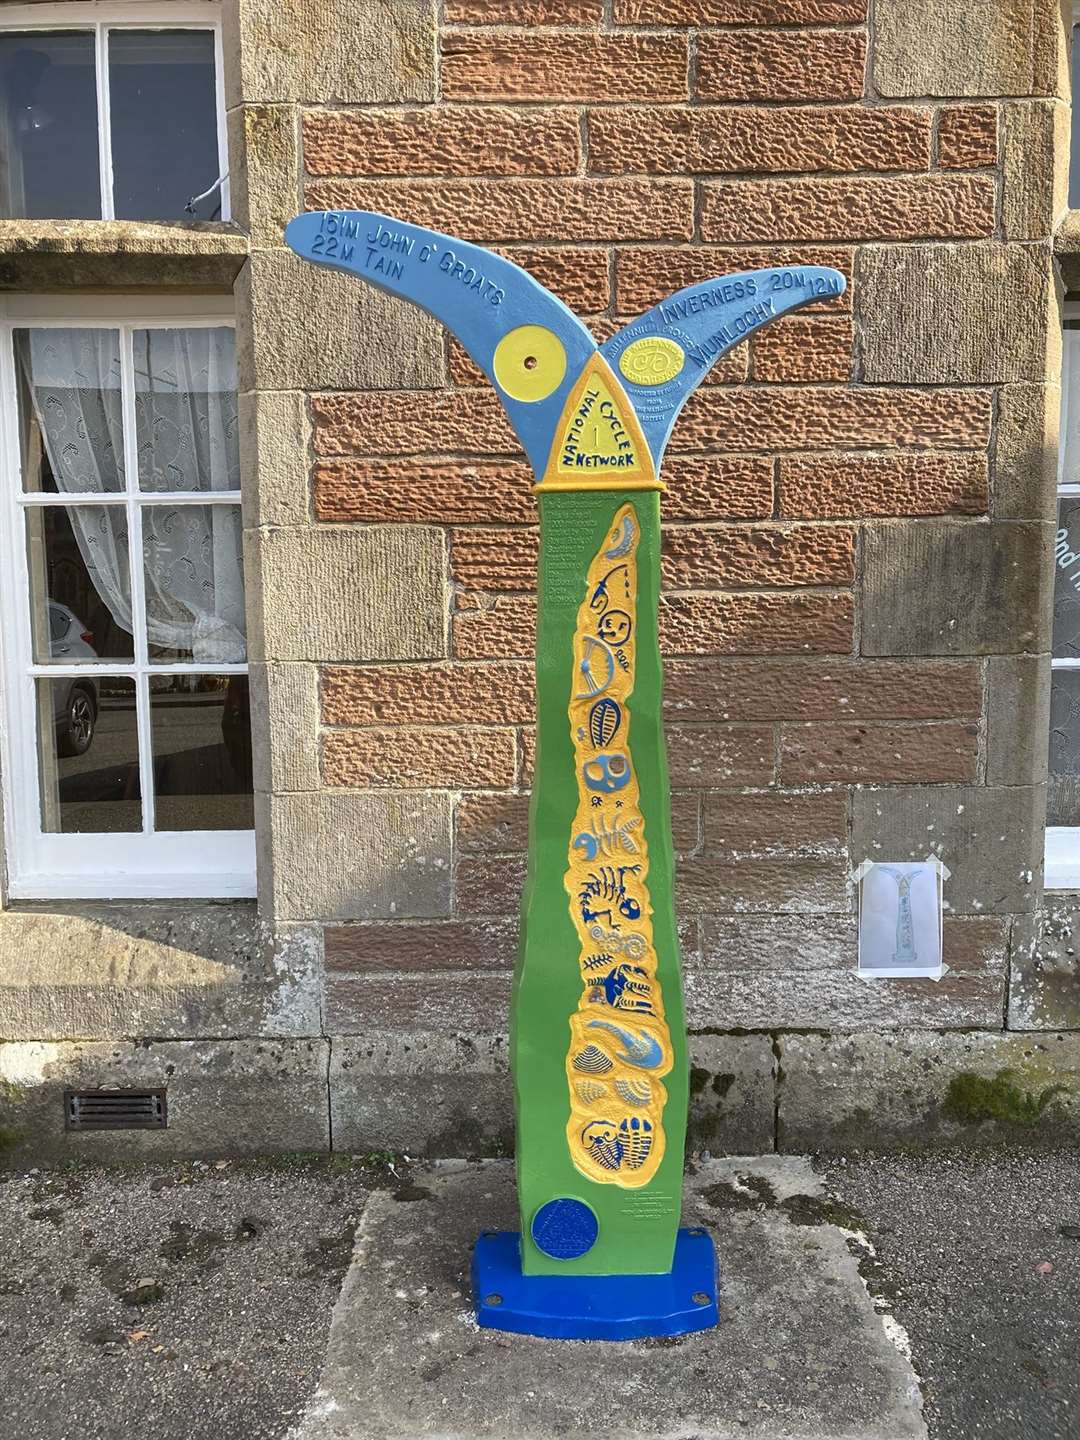 Milepost at Dingwall railway station – after Laura White painted the Ross-shire landmark.